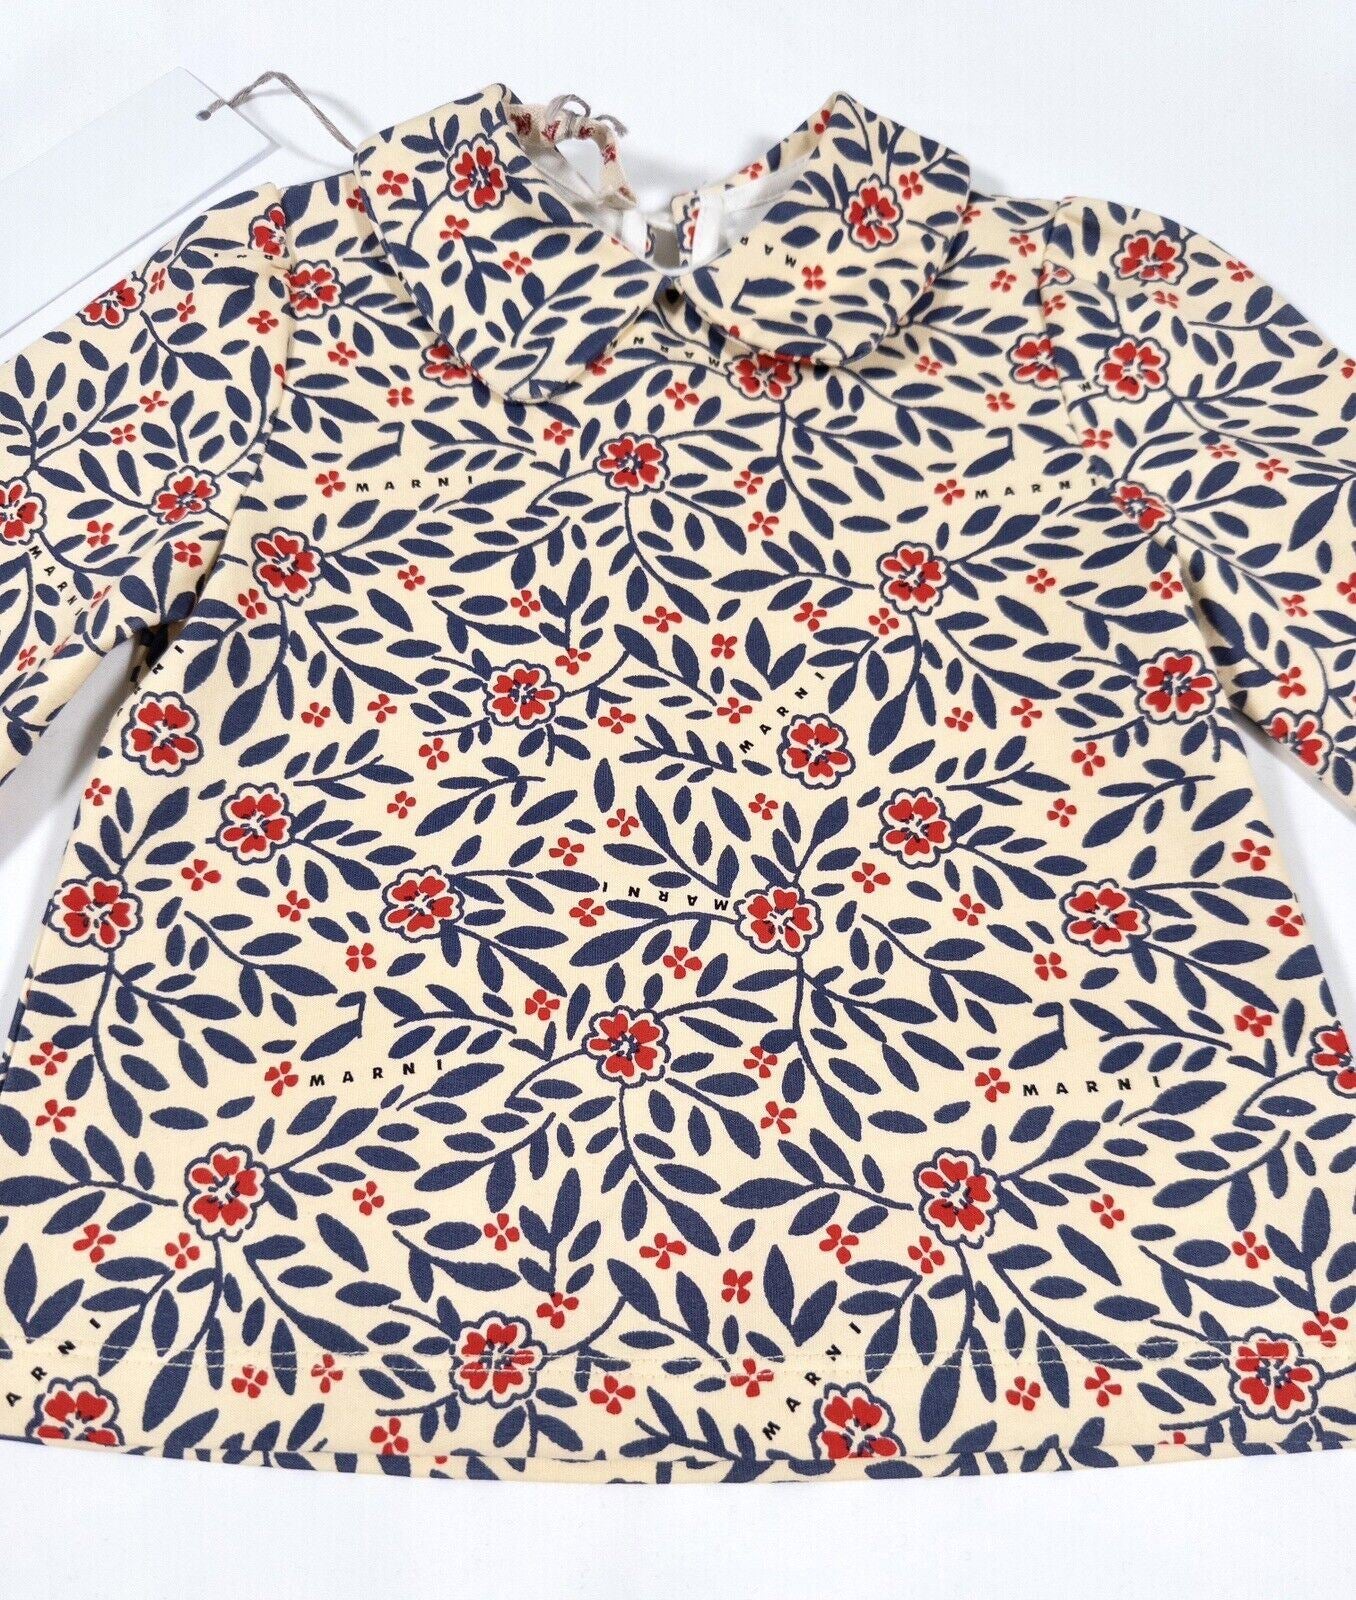 MARNI Kids Baby Girls Floral Top Blouse Blue Red Cream Collar Size UK 12 Months